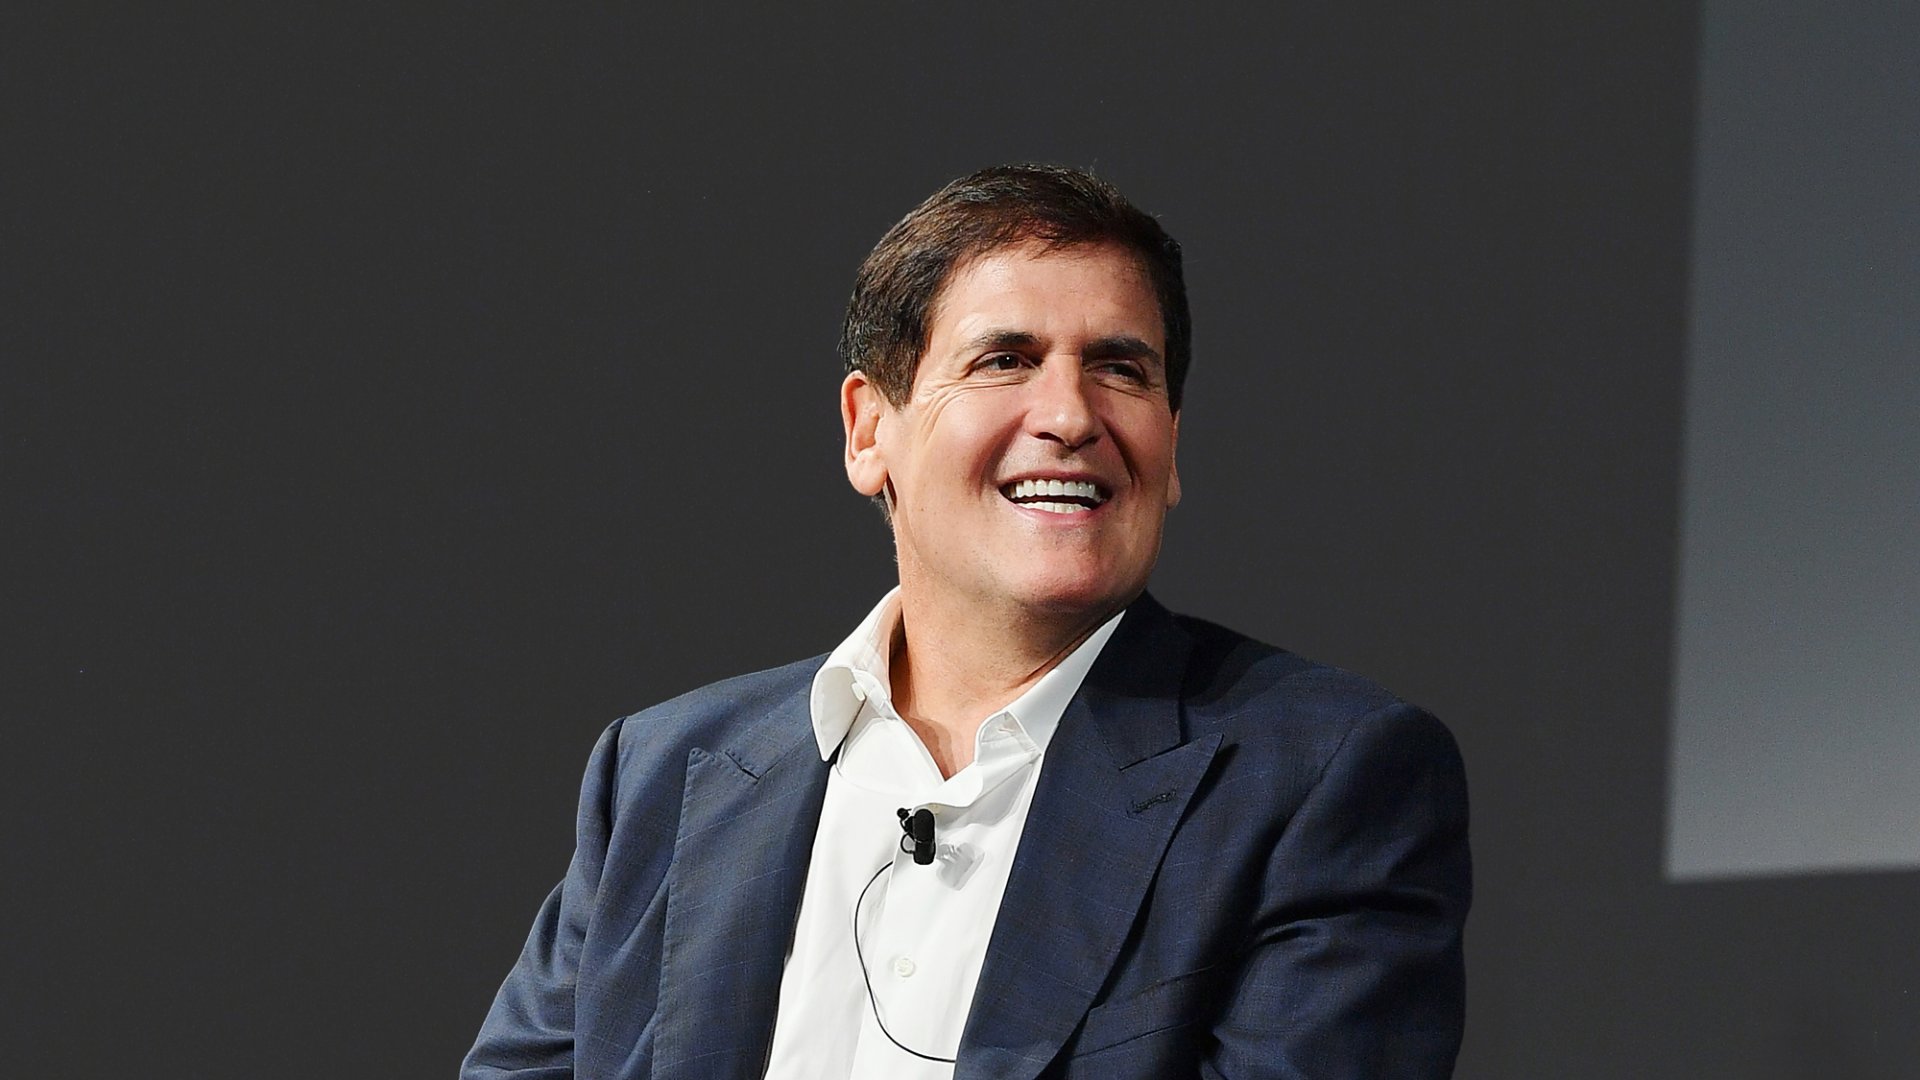 Mark Cuban’s Investment in Bitcoin Over Gold: Experts Weigh In